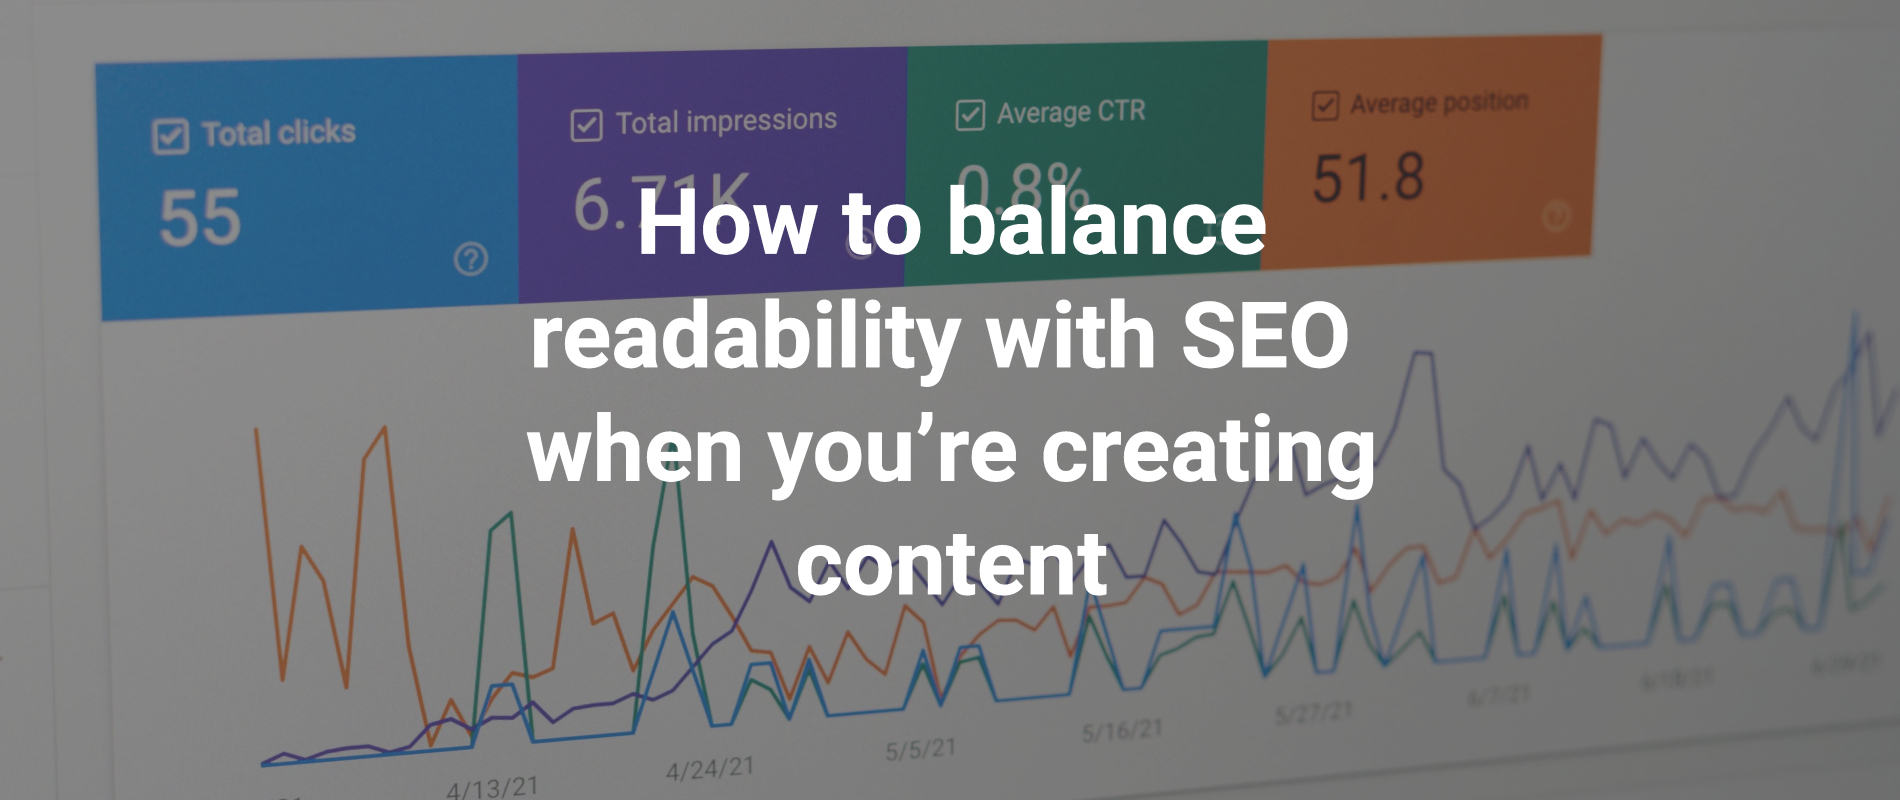 How to balance readability with SEO when you’re creating content